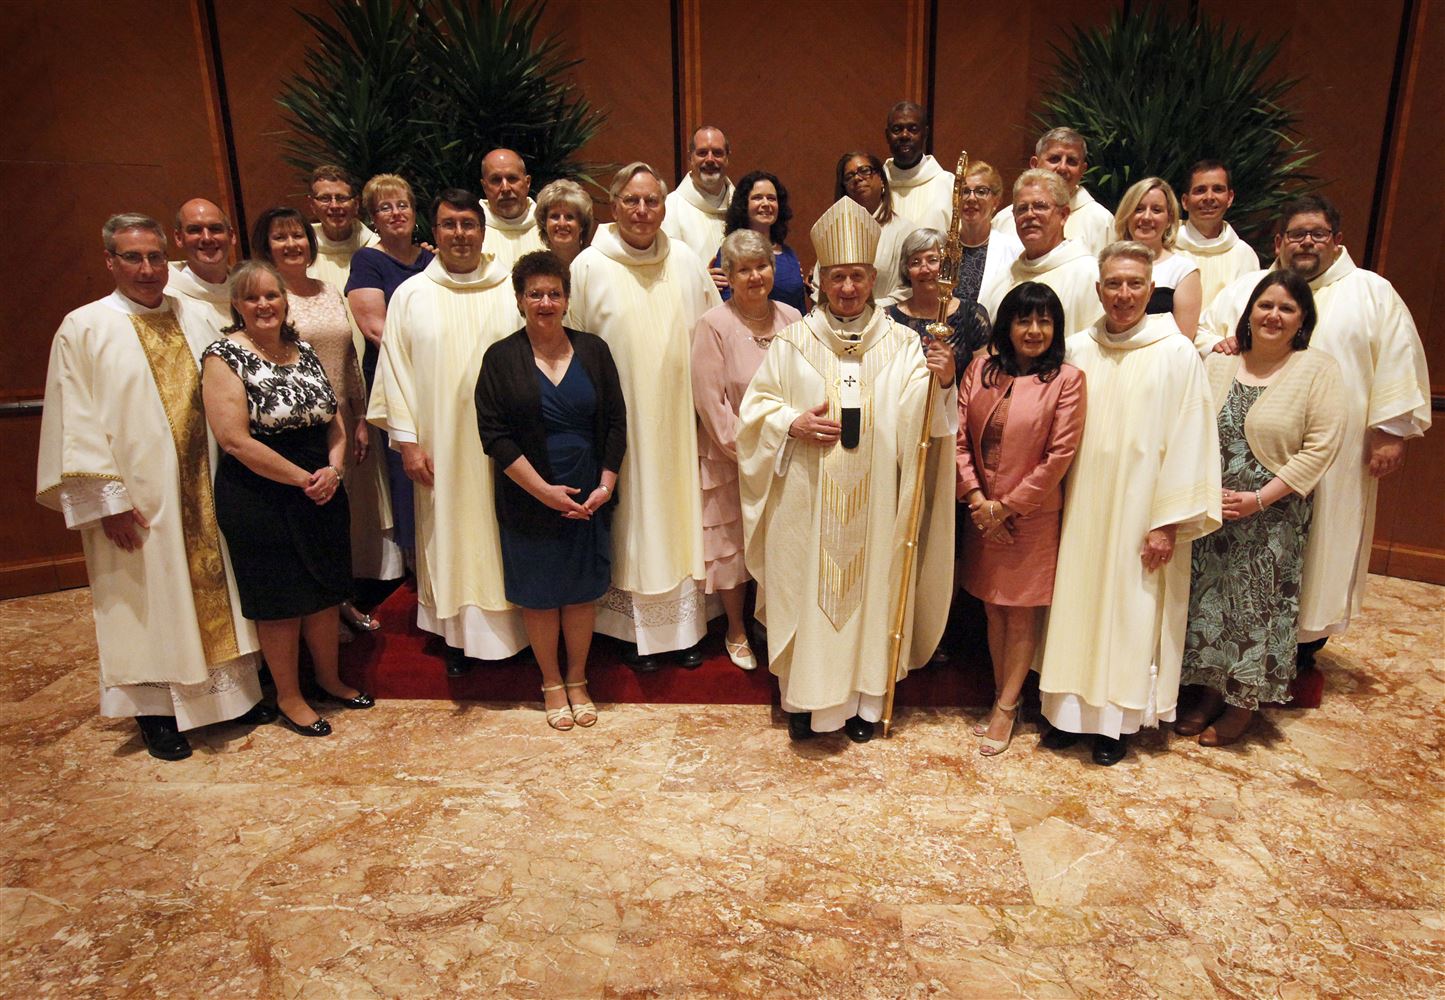 Meet the archdiocese’s newest deacons - Chicagoland - Chicago Catholic